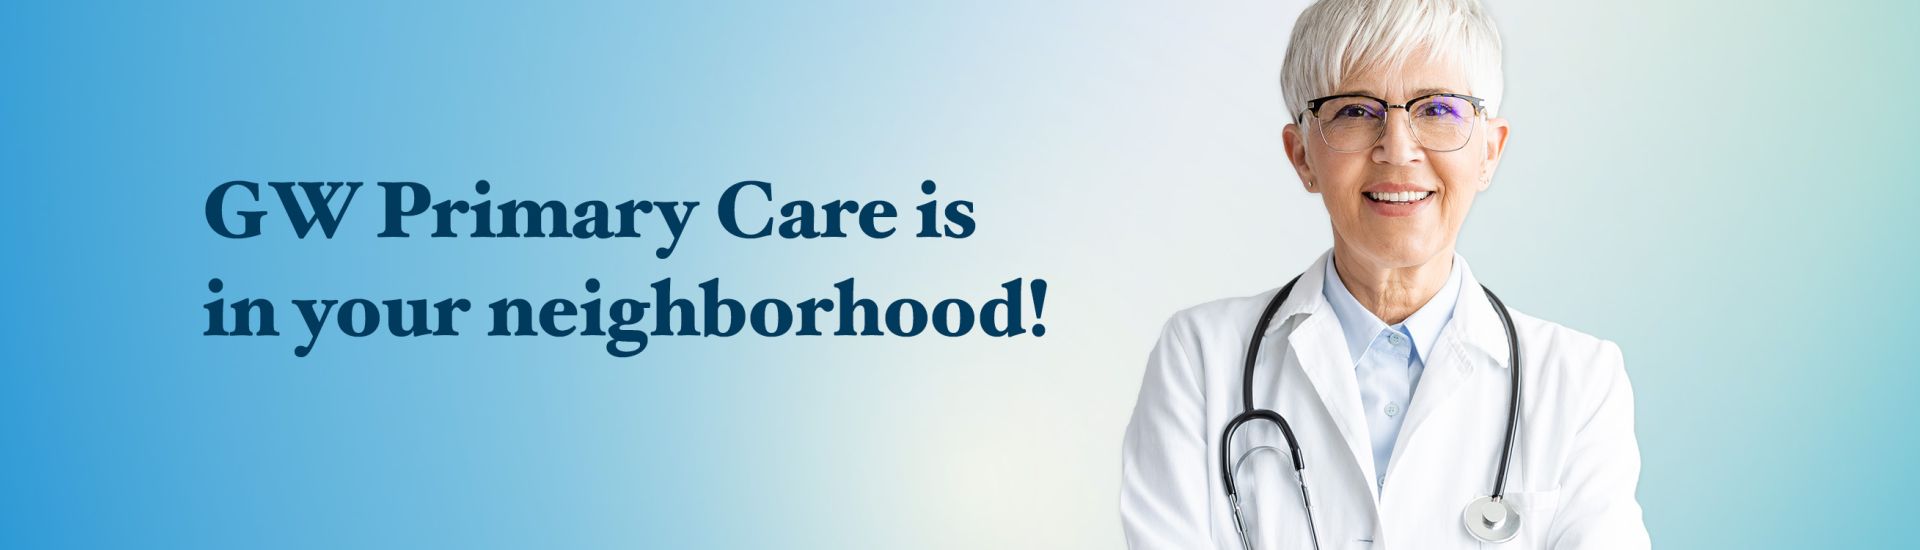 GW Primary Care is in your neighborhood